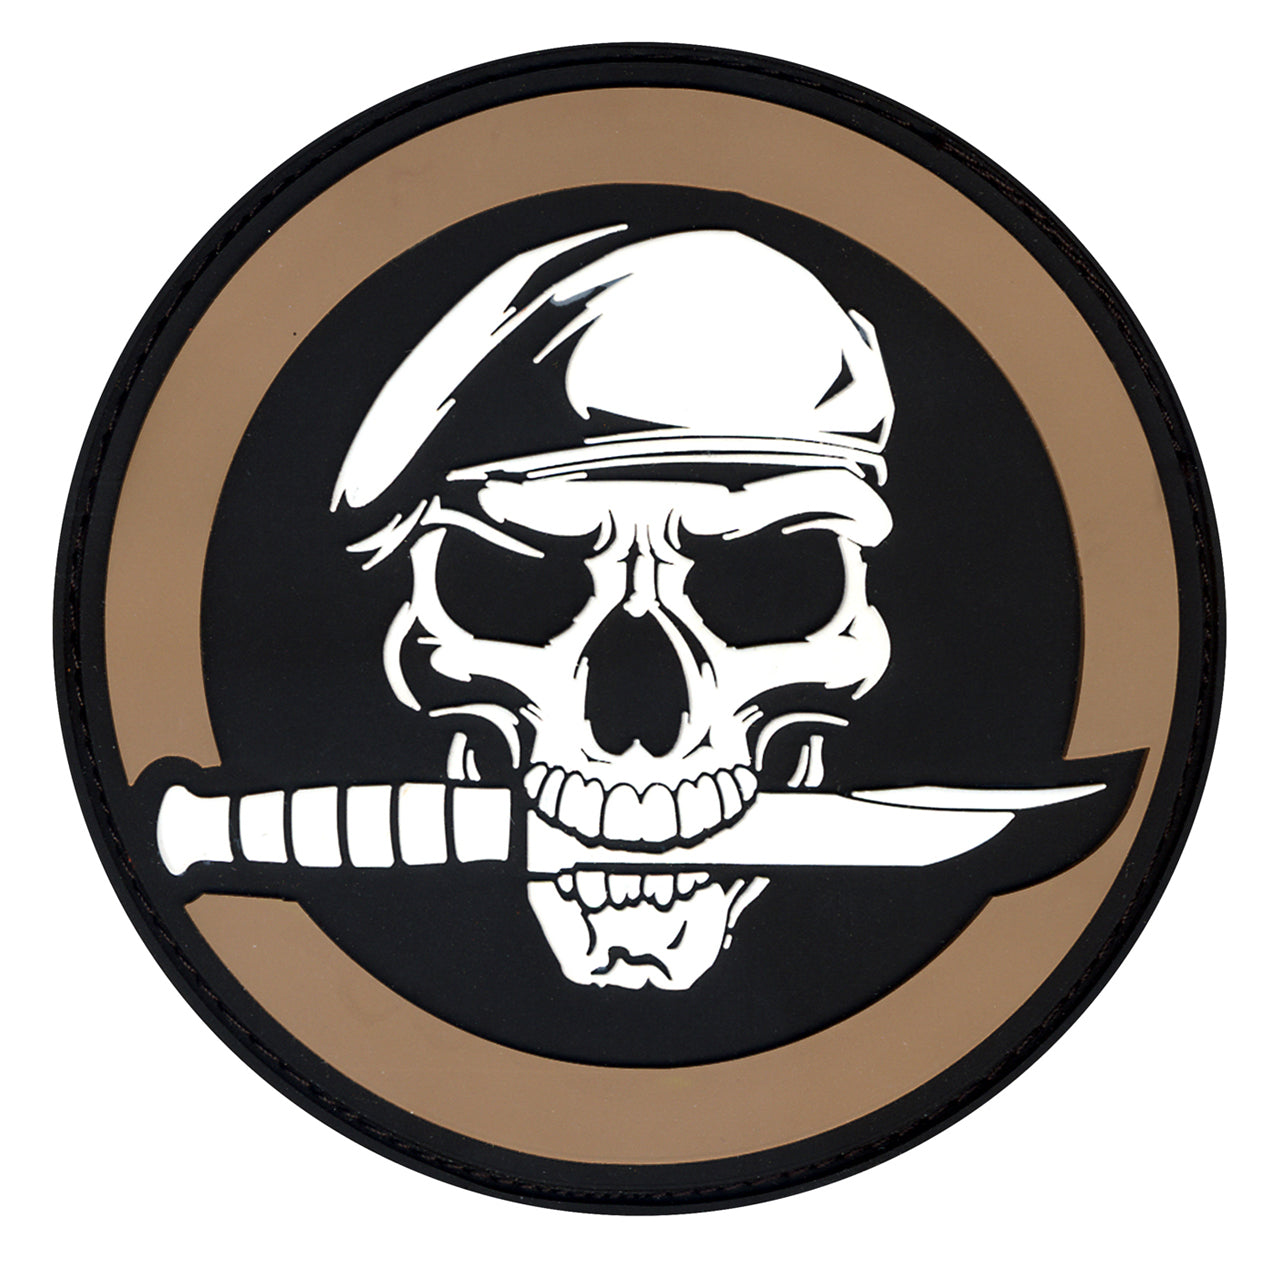 Skull and Knife Patch is a military-inspired morale patch  Military Skull And Knife Design PVC Rubberized Material Measures 2.75" Round And Features Hook And Loop Field On Back moralepatches.com.au will try and bring you the largest range of morale patch products available on the market in Australia over the next couple years.  To support us in this journey, please simply buy a patch and thank you so much for your support.